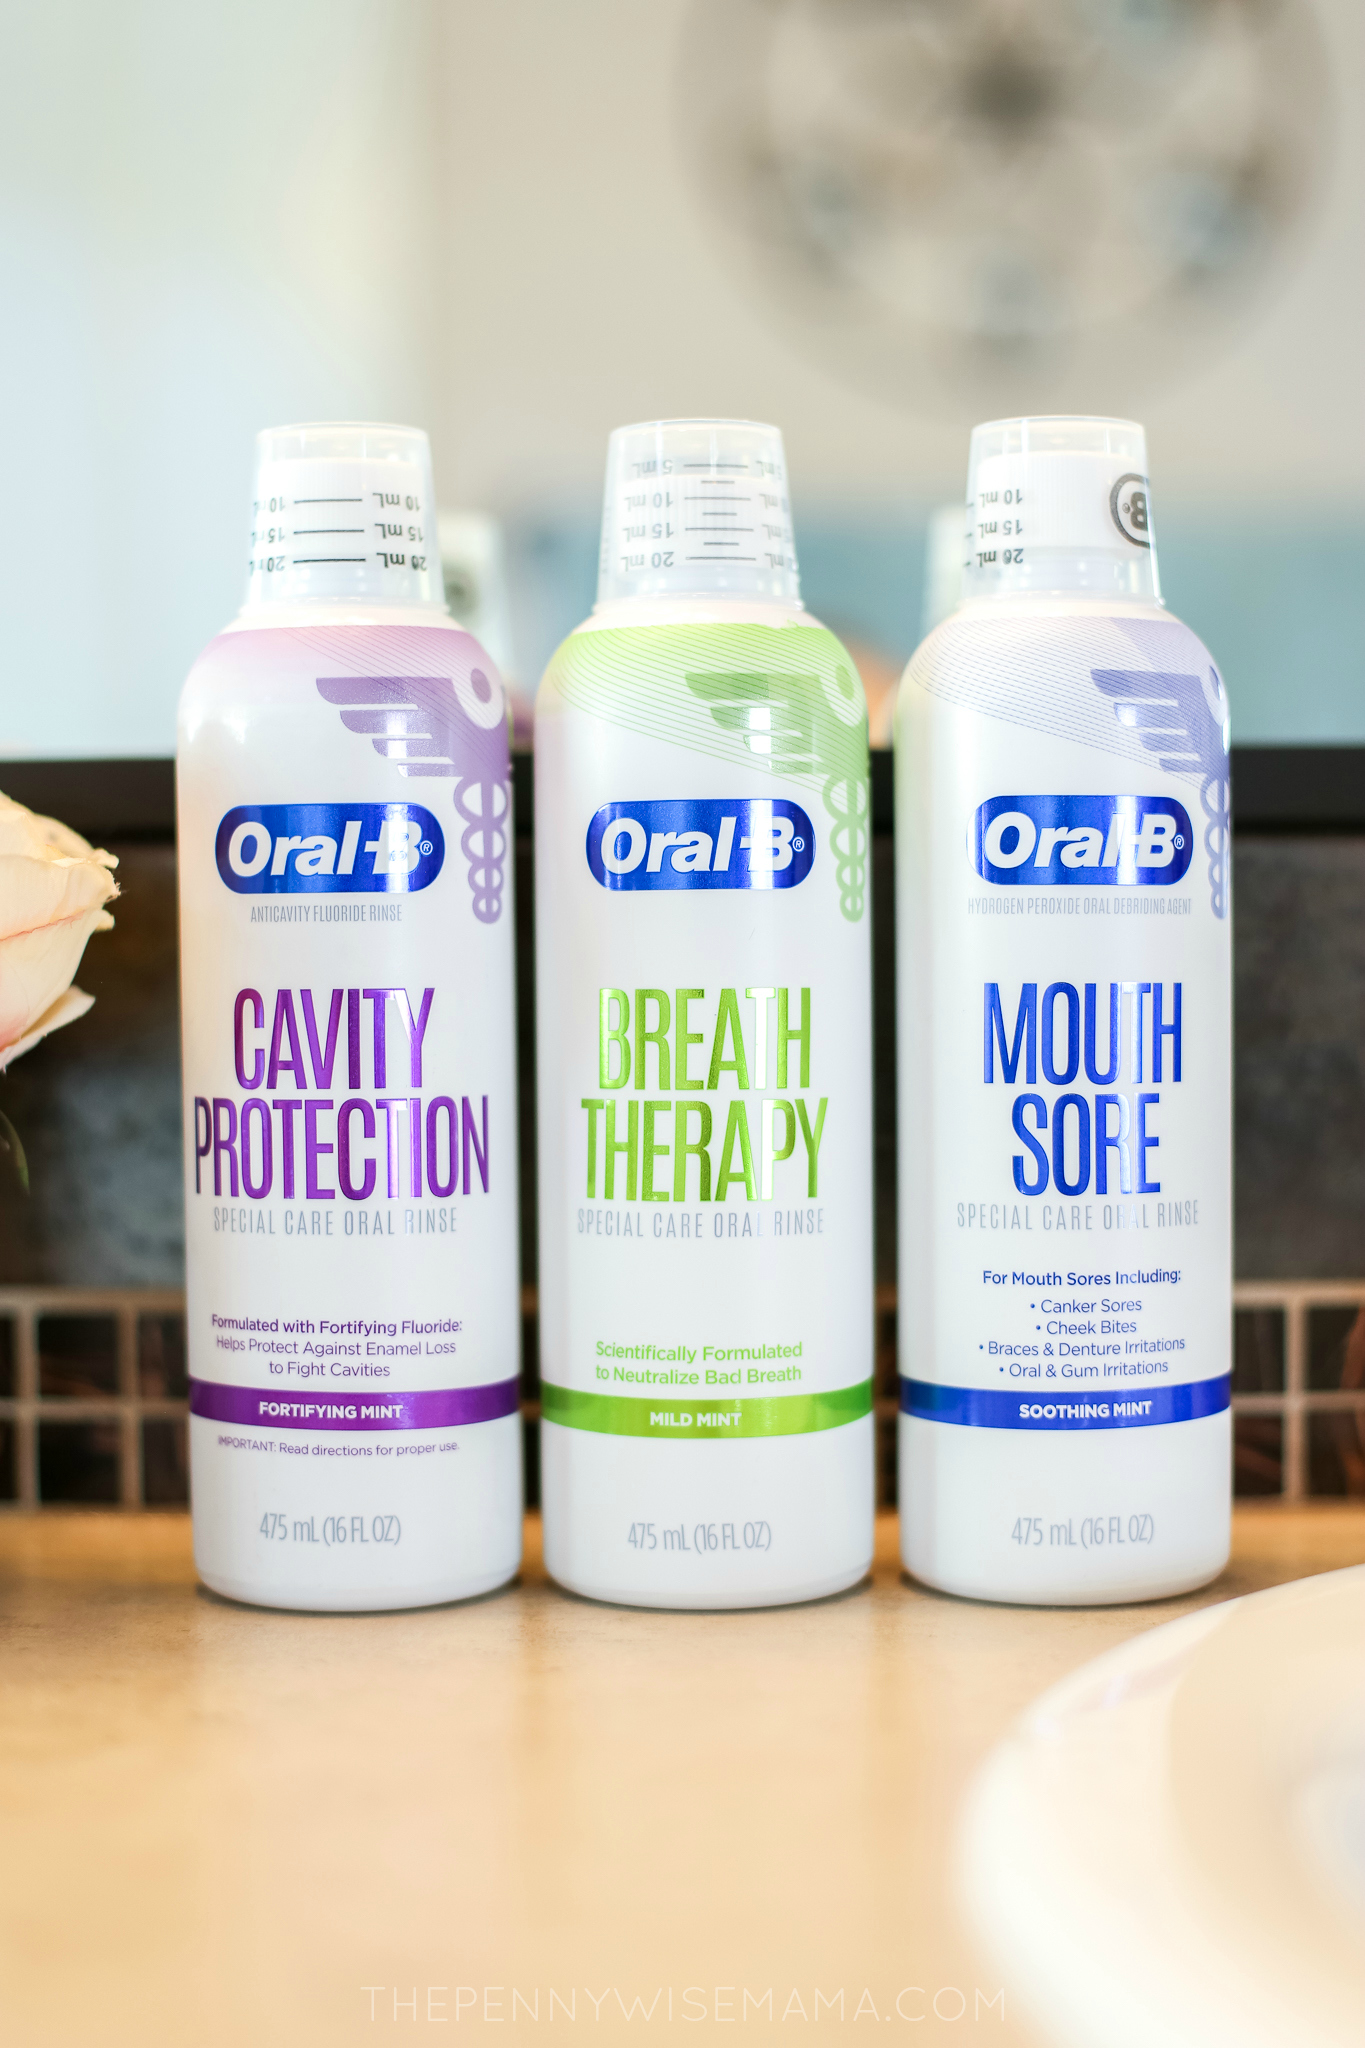 SAVE $2 ON NEW ORAL-B SPECIAL CARE ORAL RINSES